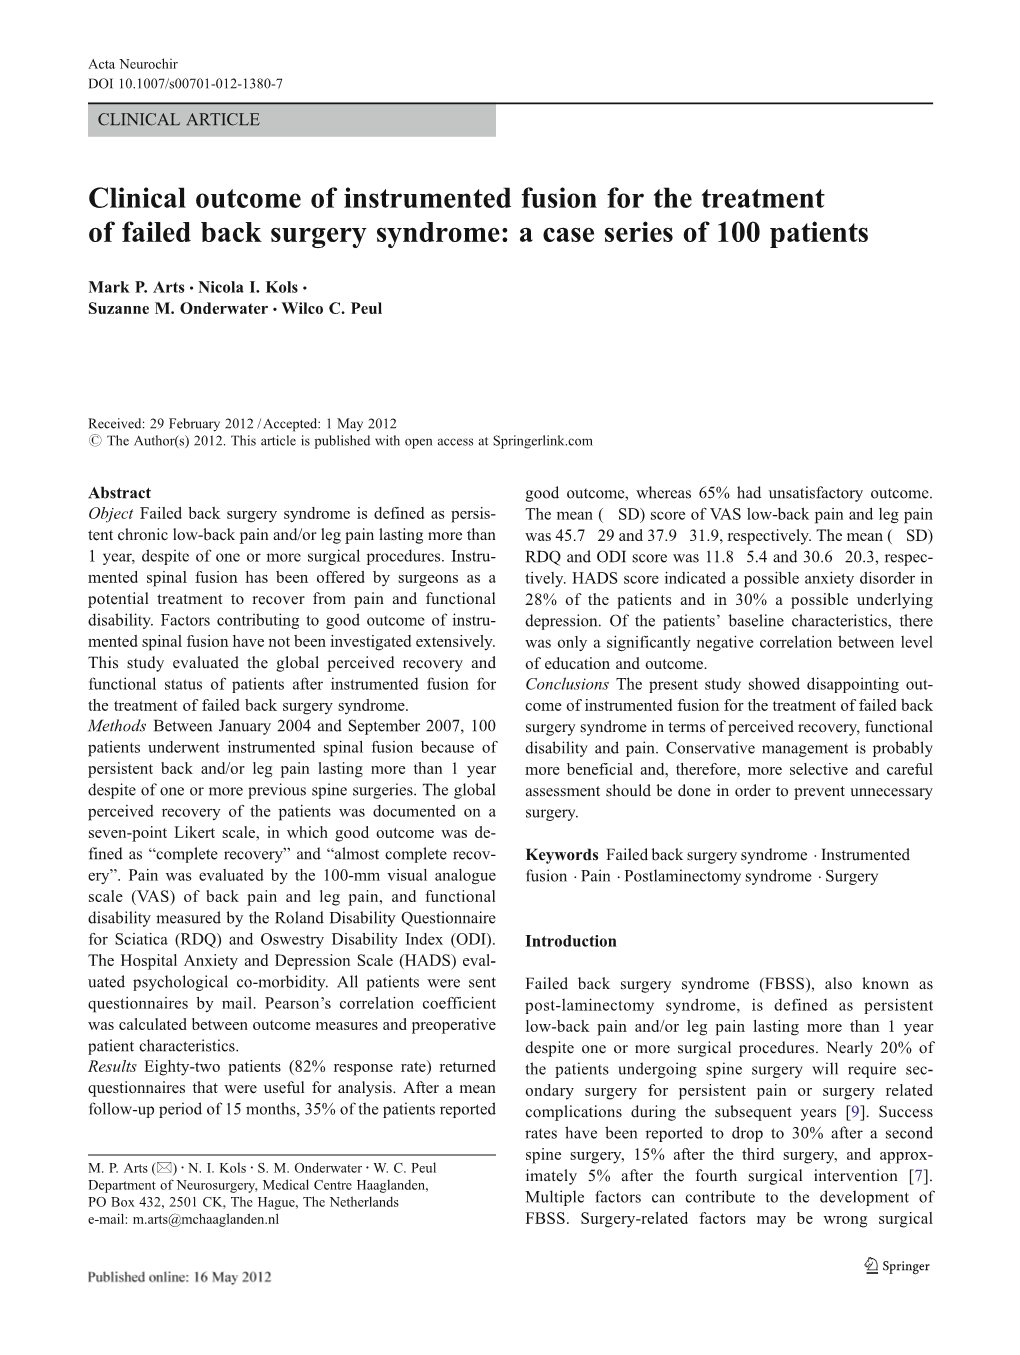 Clinical Outcome of Instrumented Fusion for the Treatment of Failed Back Surgery Syndrome: a Case Series of 100 Patients